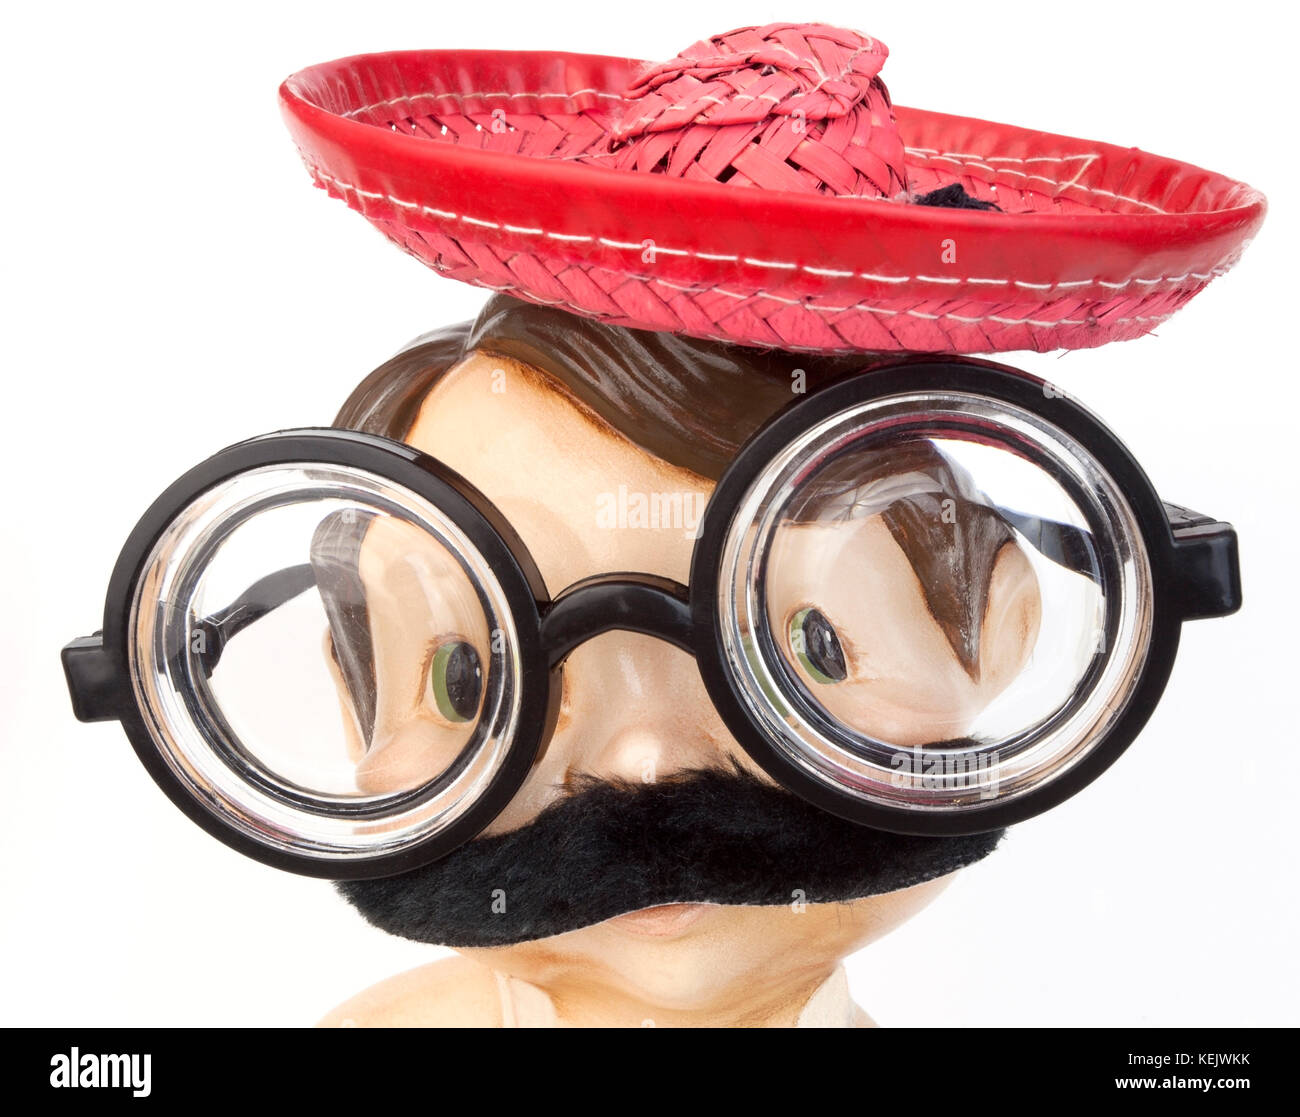 Silly goofy face made with red straw hat, mustache and nerd glasses. Isolated. Stock Photo